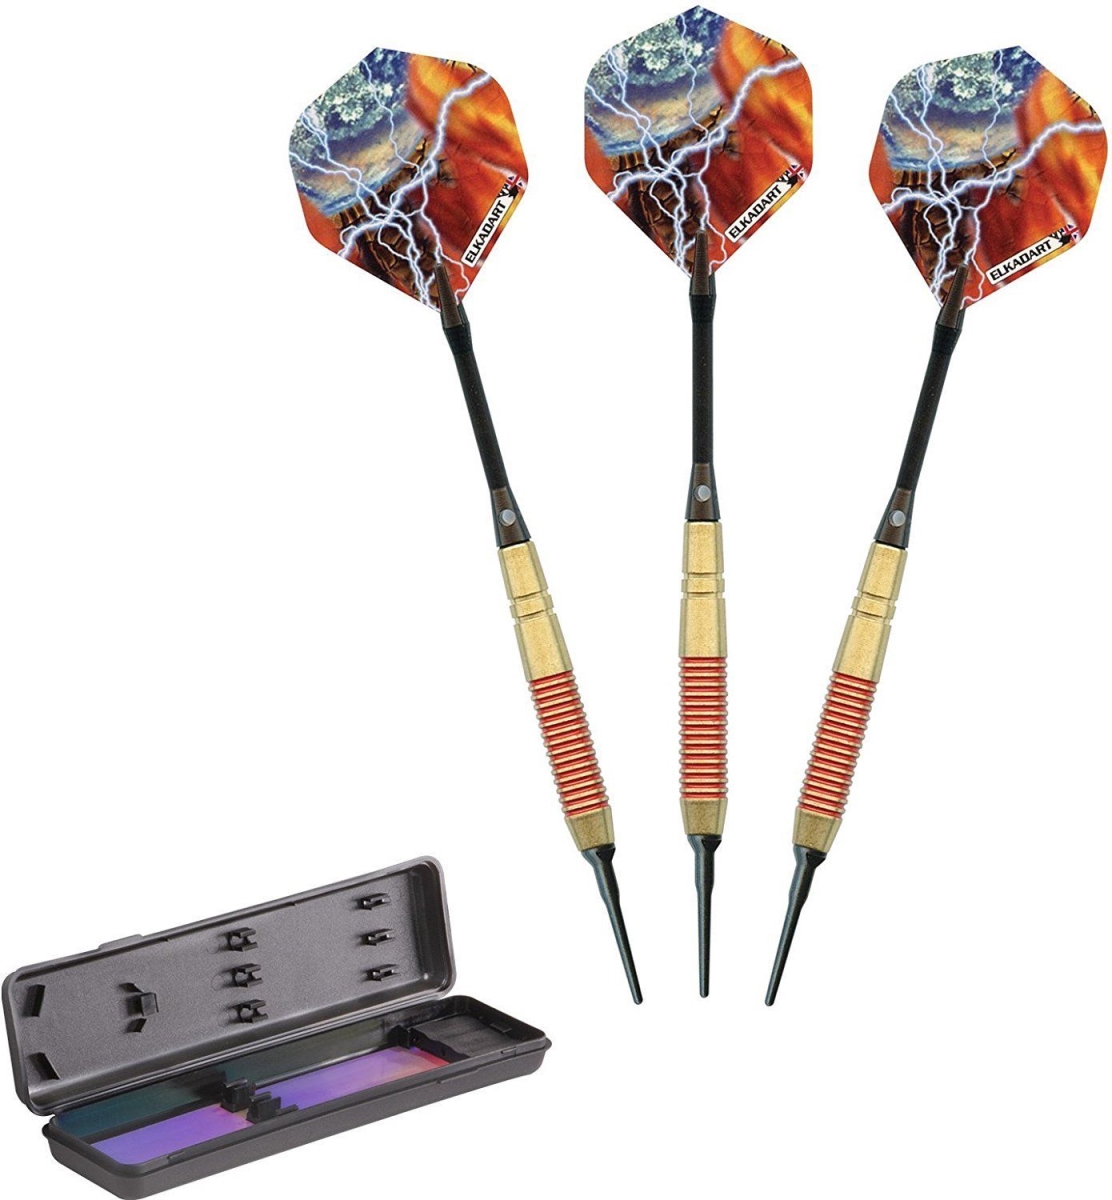 Picture of Elkadart 20-1182-17 17 g Storm Soft Tip Darts Red Rings